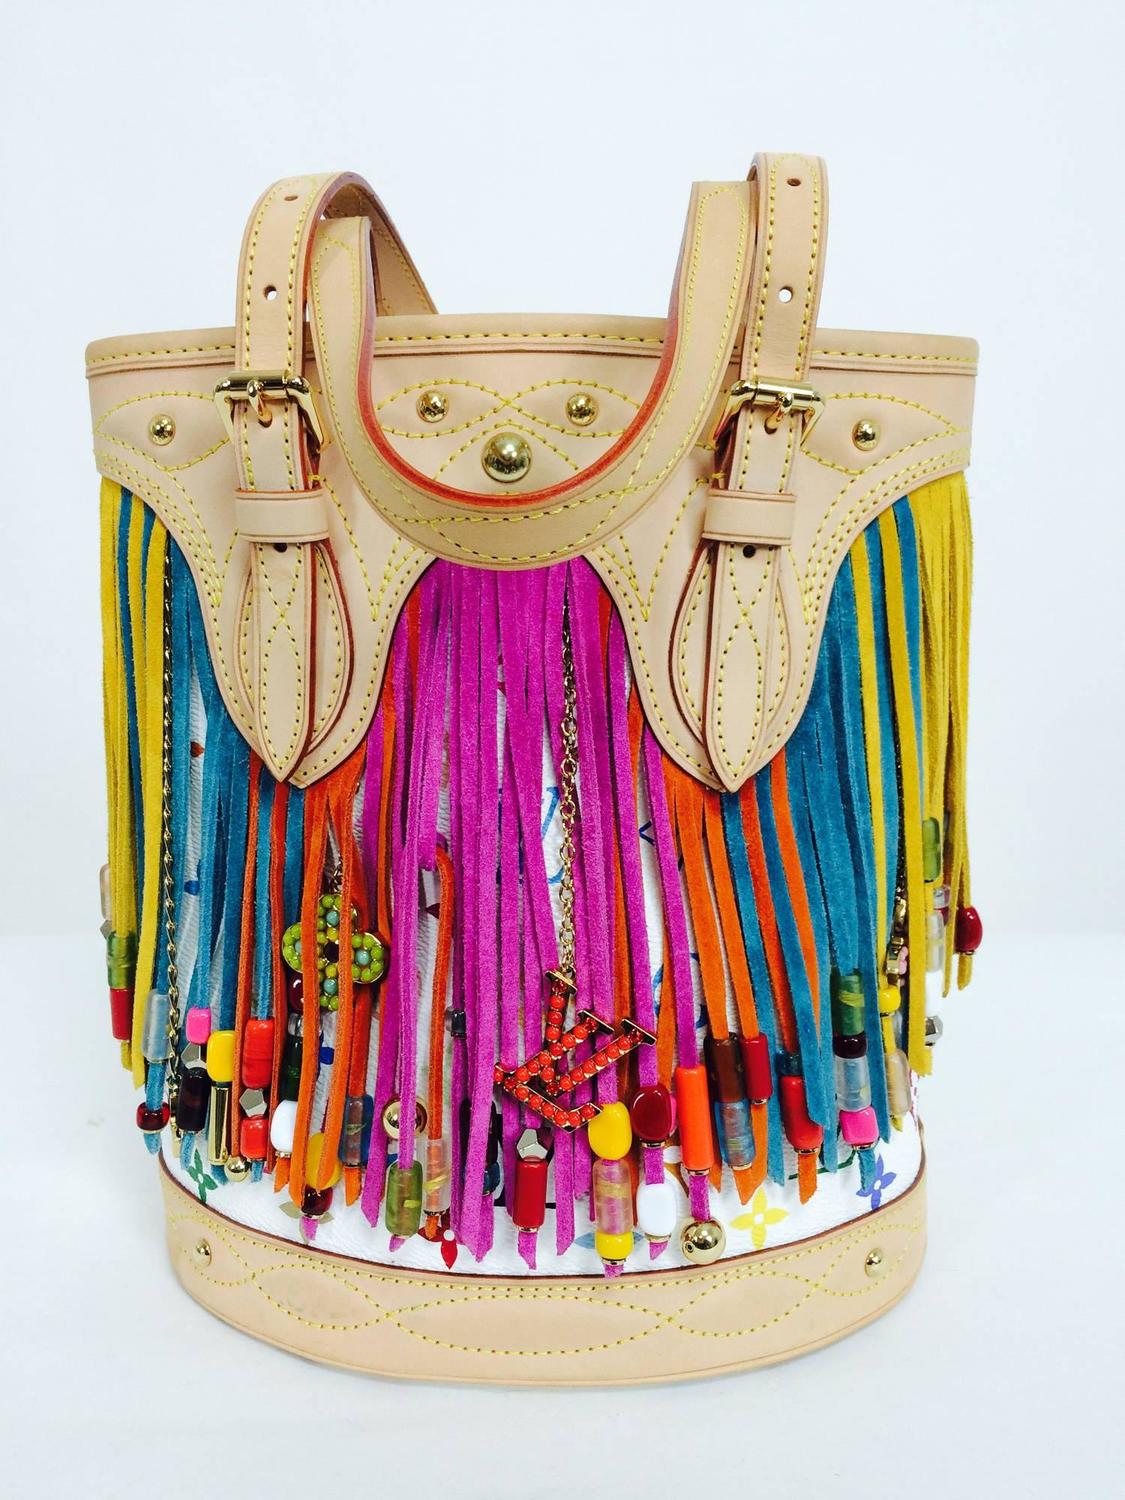 Louis Vuitton Multicolore Fringe Bucket Bag designed by Takashi Murakami 2006 For Sale at 1stdibs